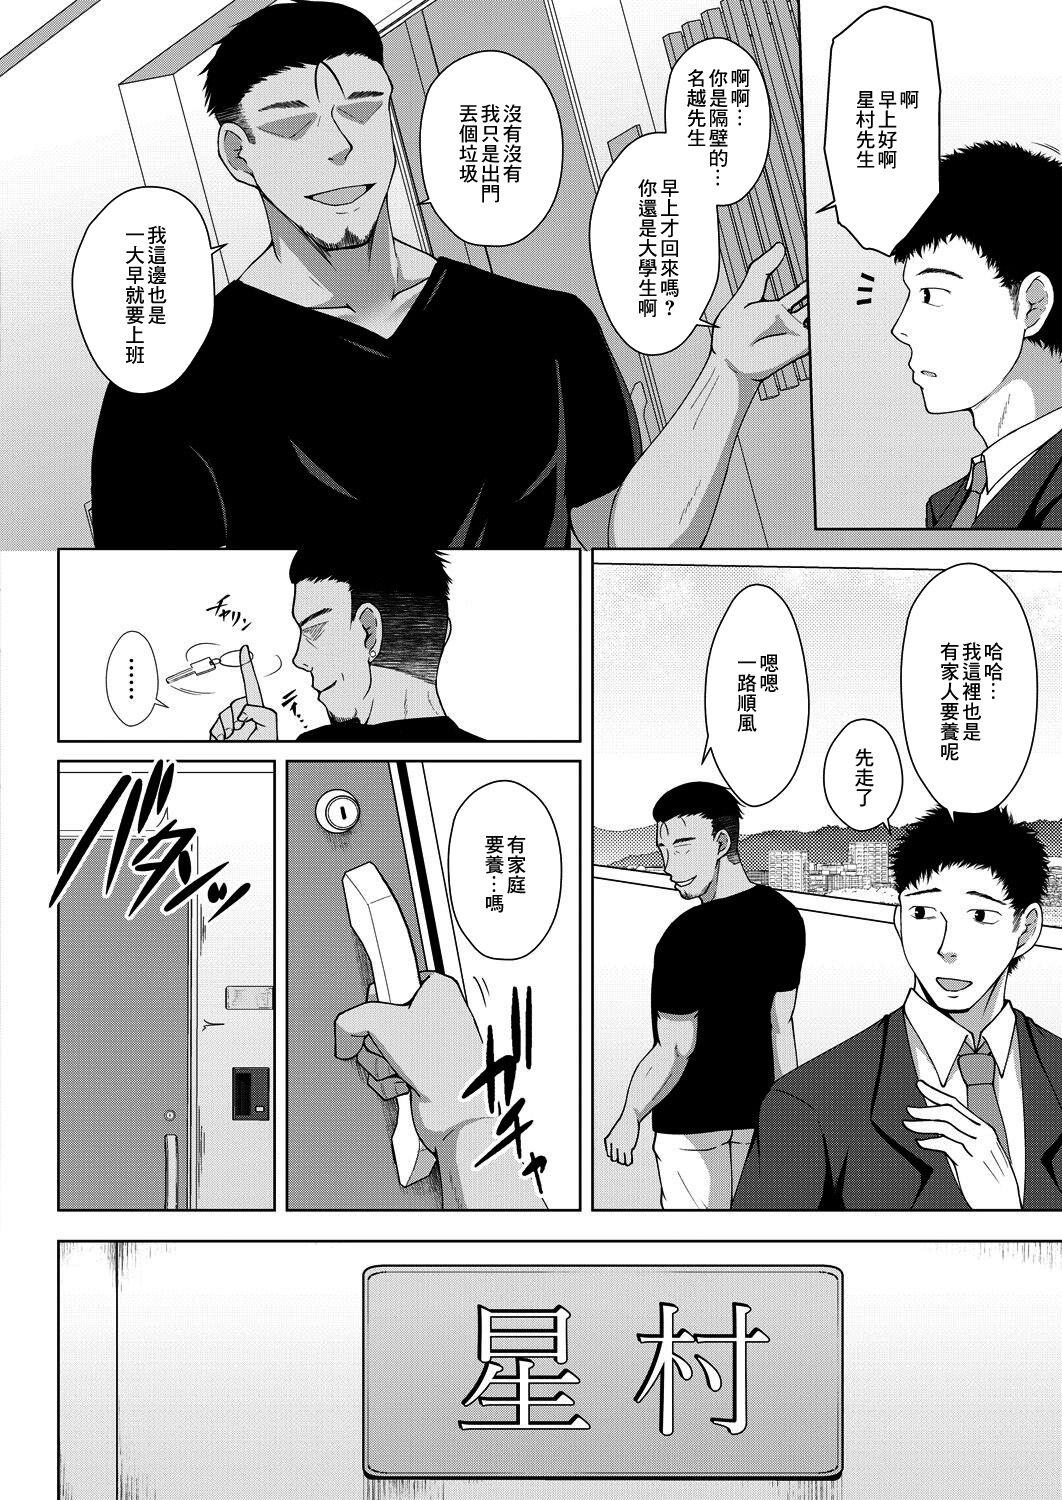 Gay 比較と選択 Class Room - Page 2